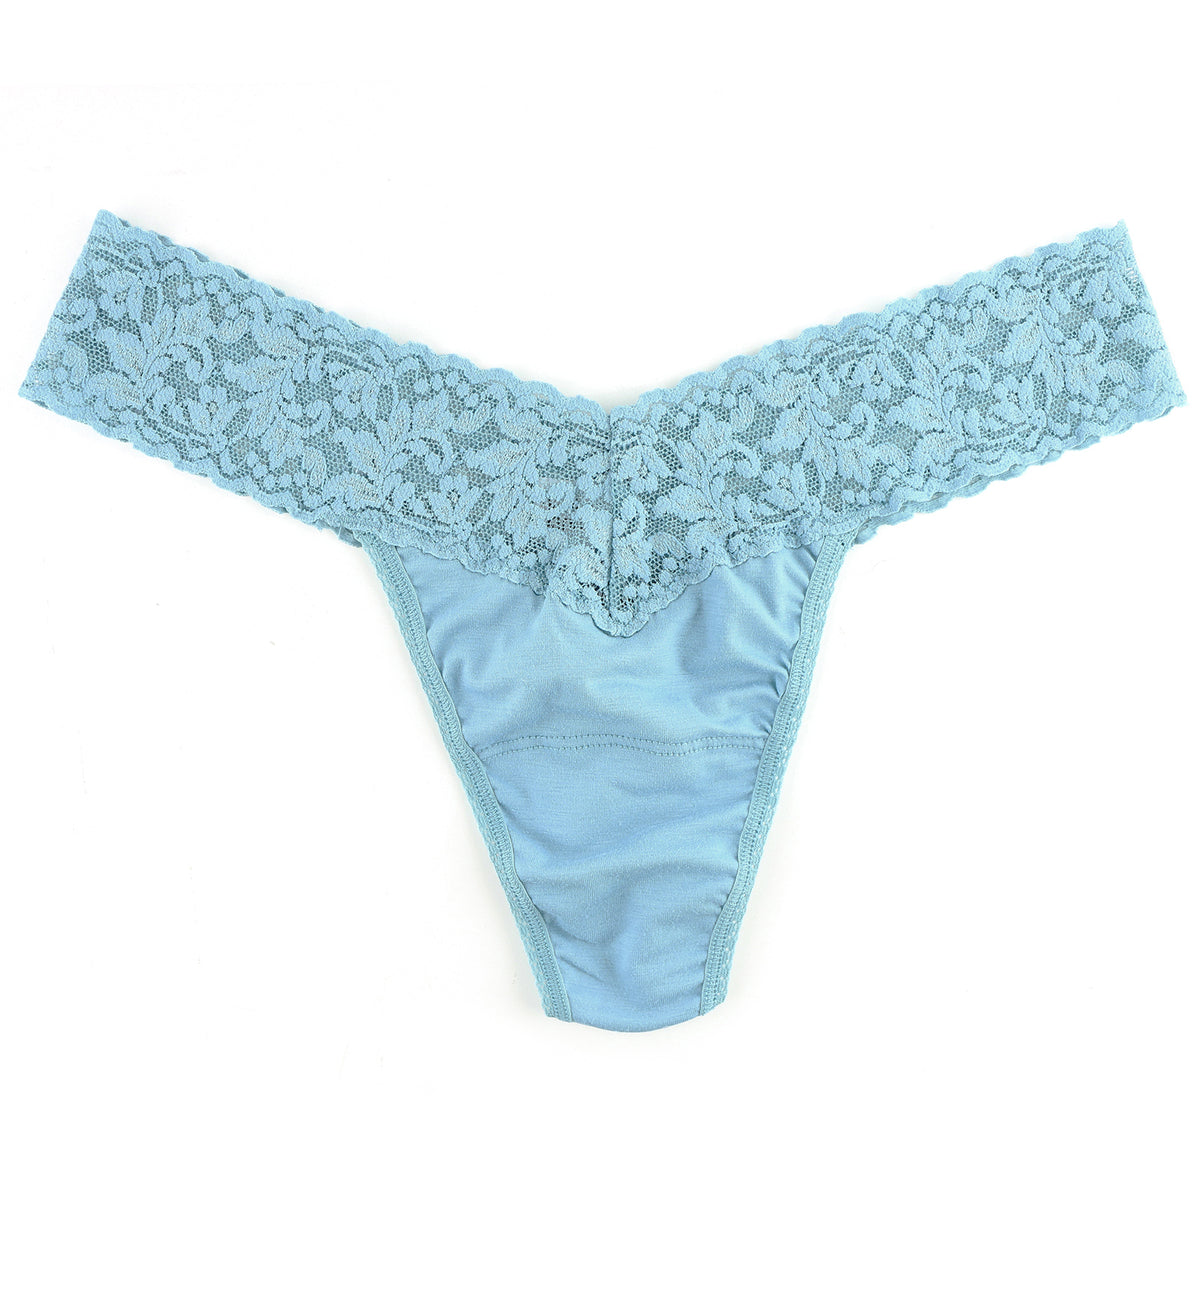 Hanky Panky Cotton Low Rise Thong (891581P),Butterfly Blue - Butterfly Blue,One Size